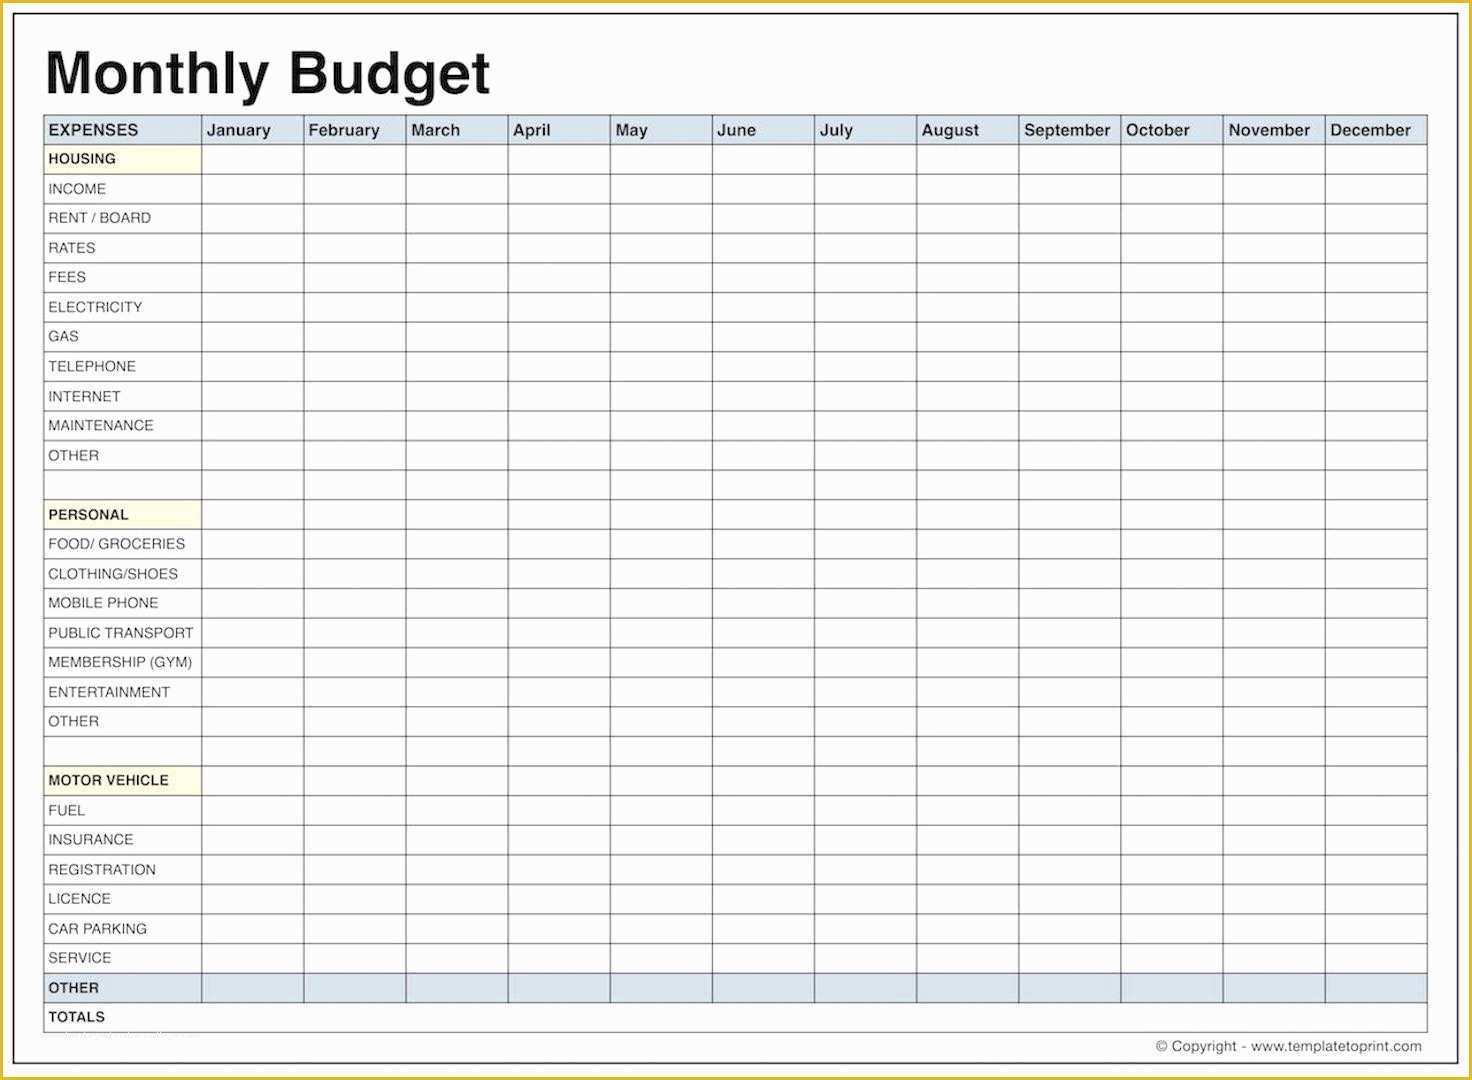 Yearly Budget Planner Template Free Of Blank Monthly Bud Template Pdf Samplebusinessresume